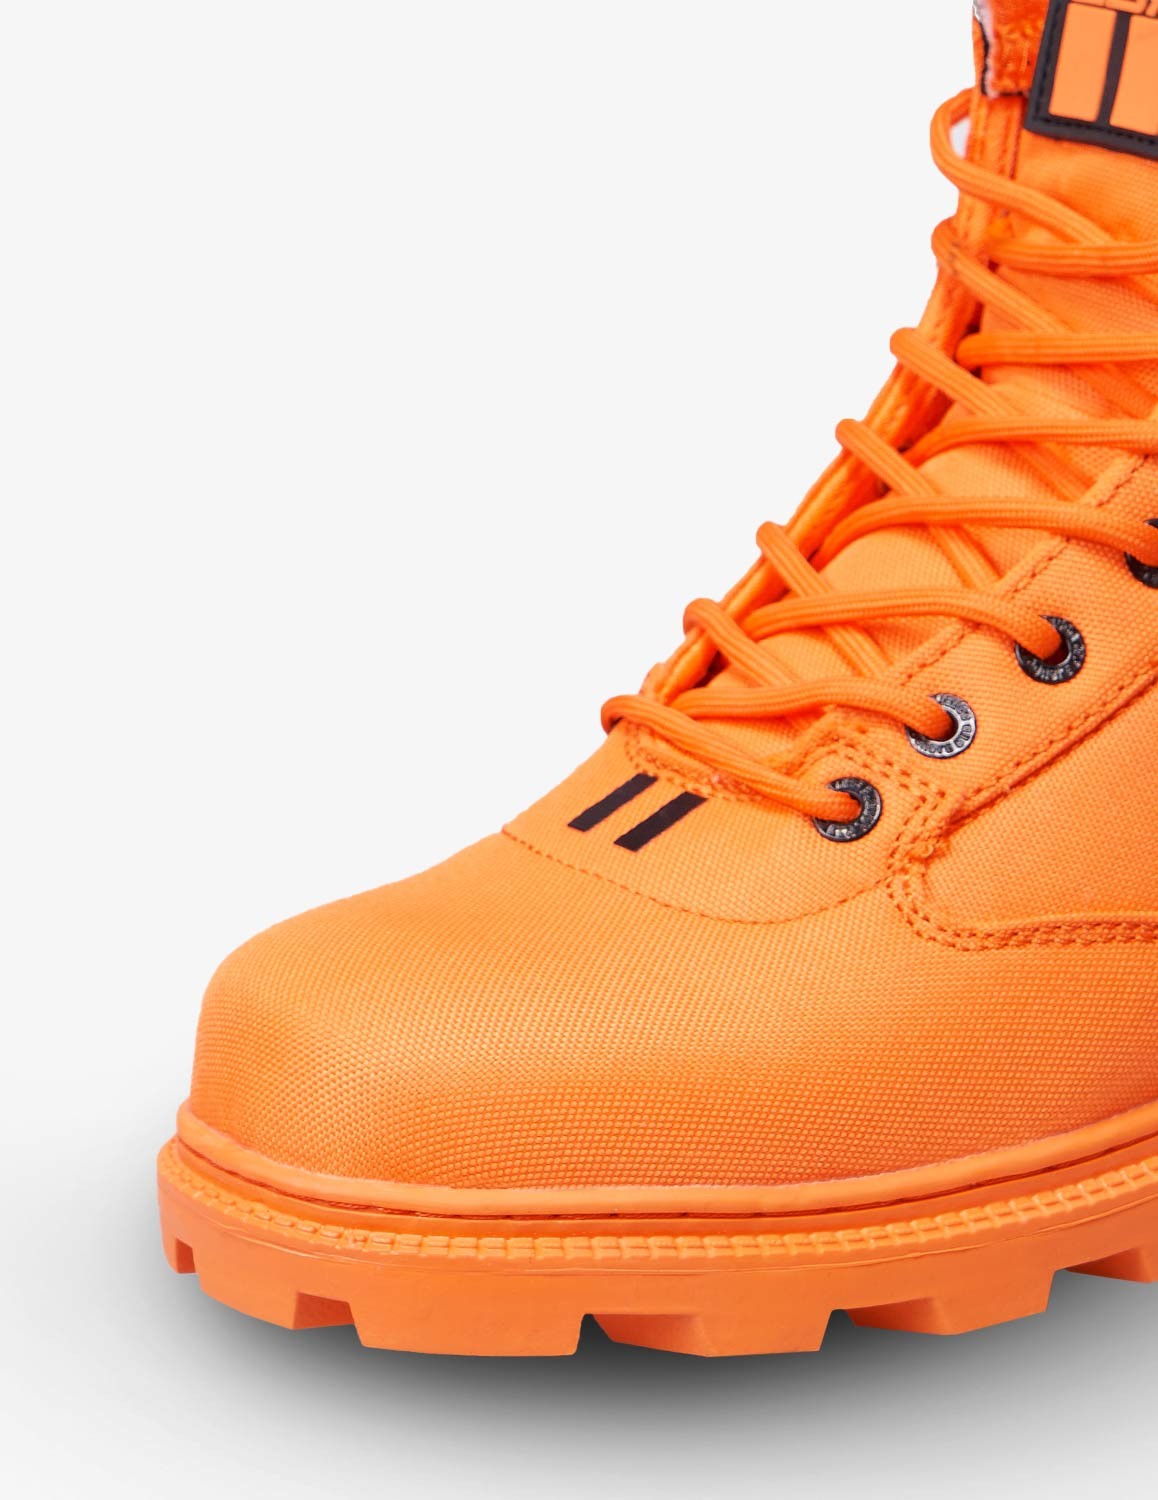 RED JUNGLE™ Tactical Boots Neon Orange